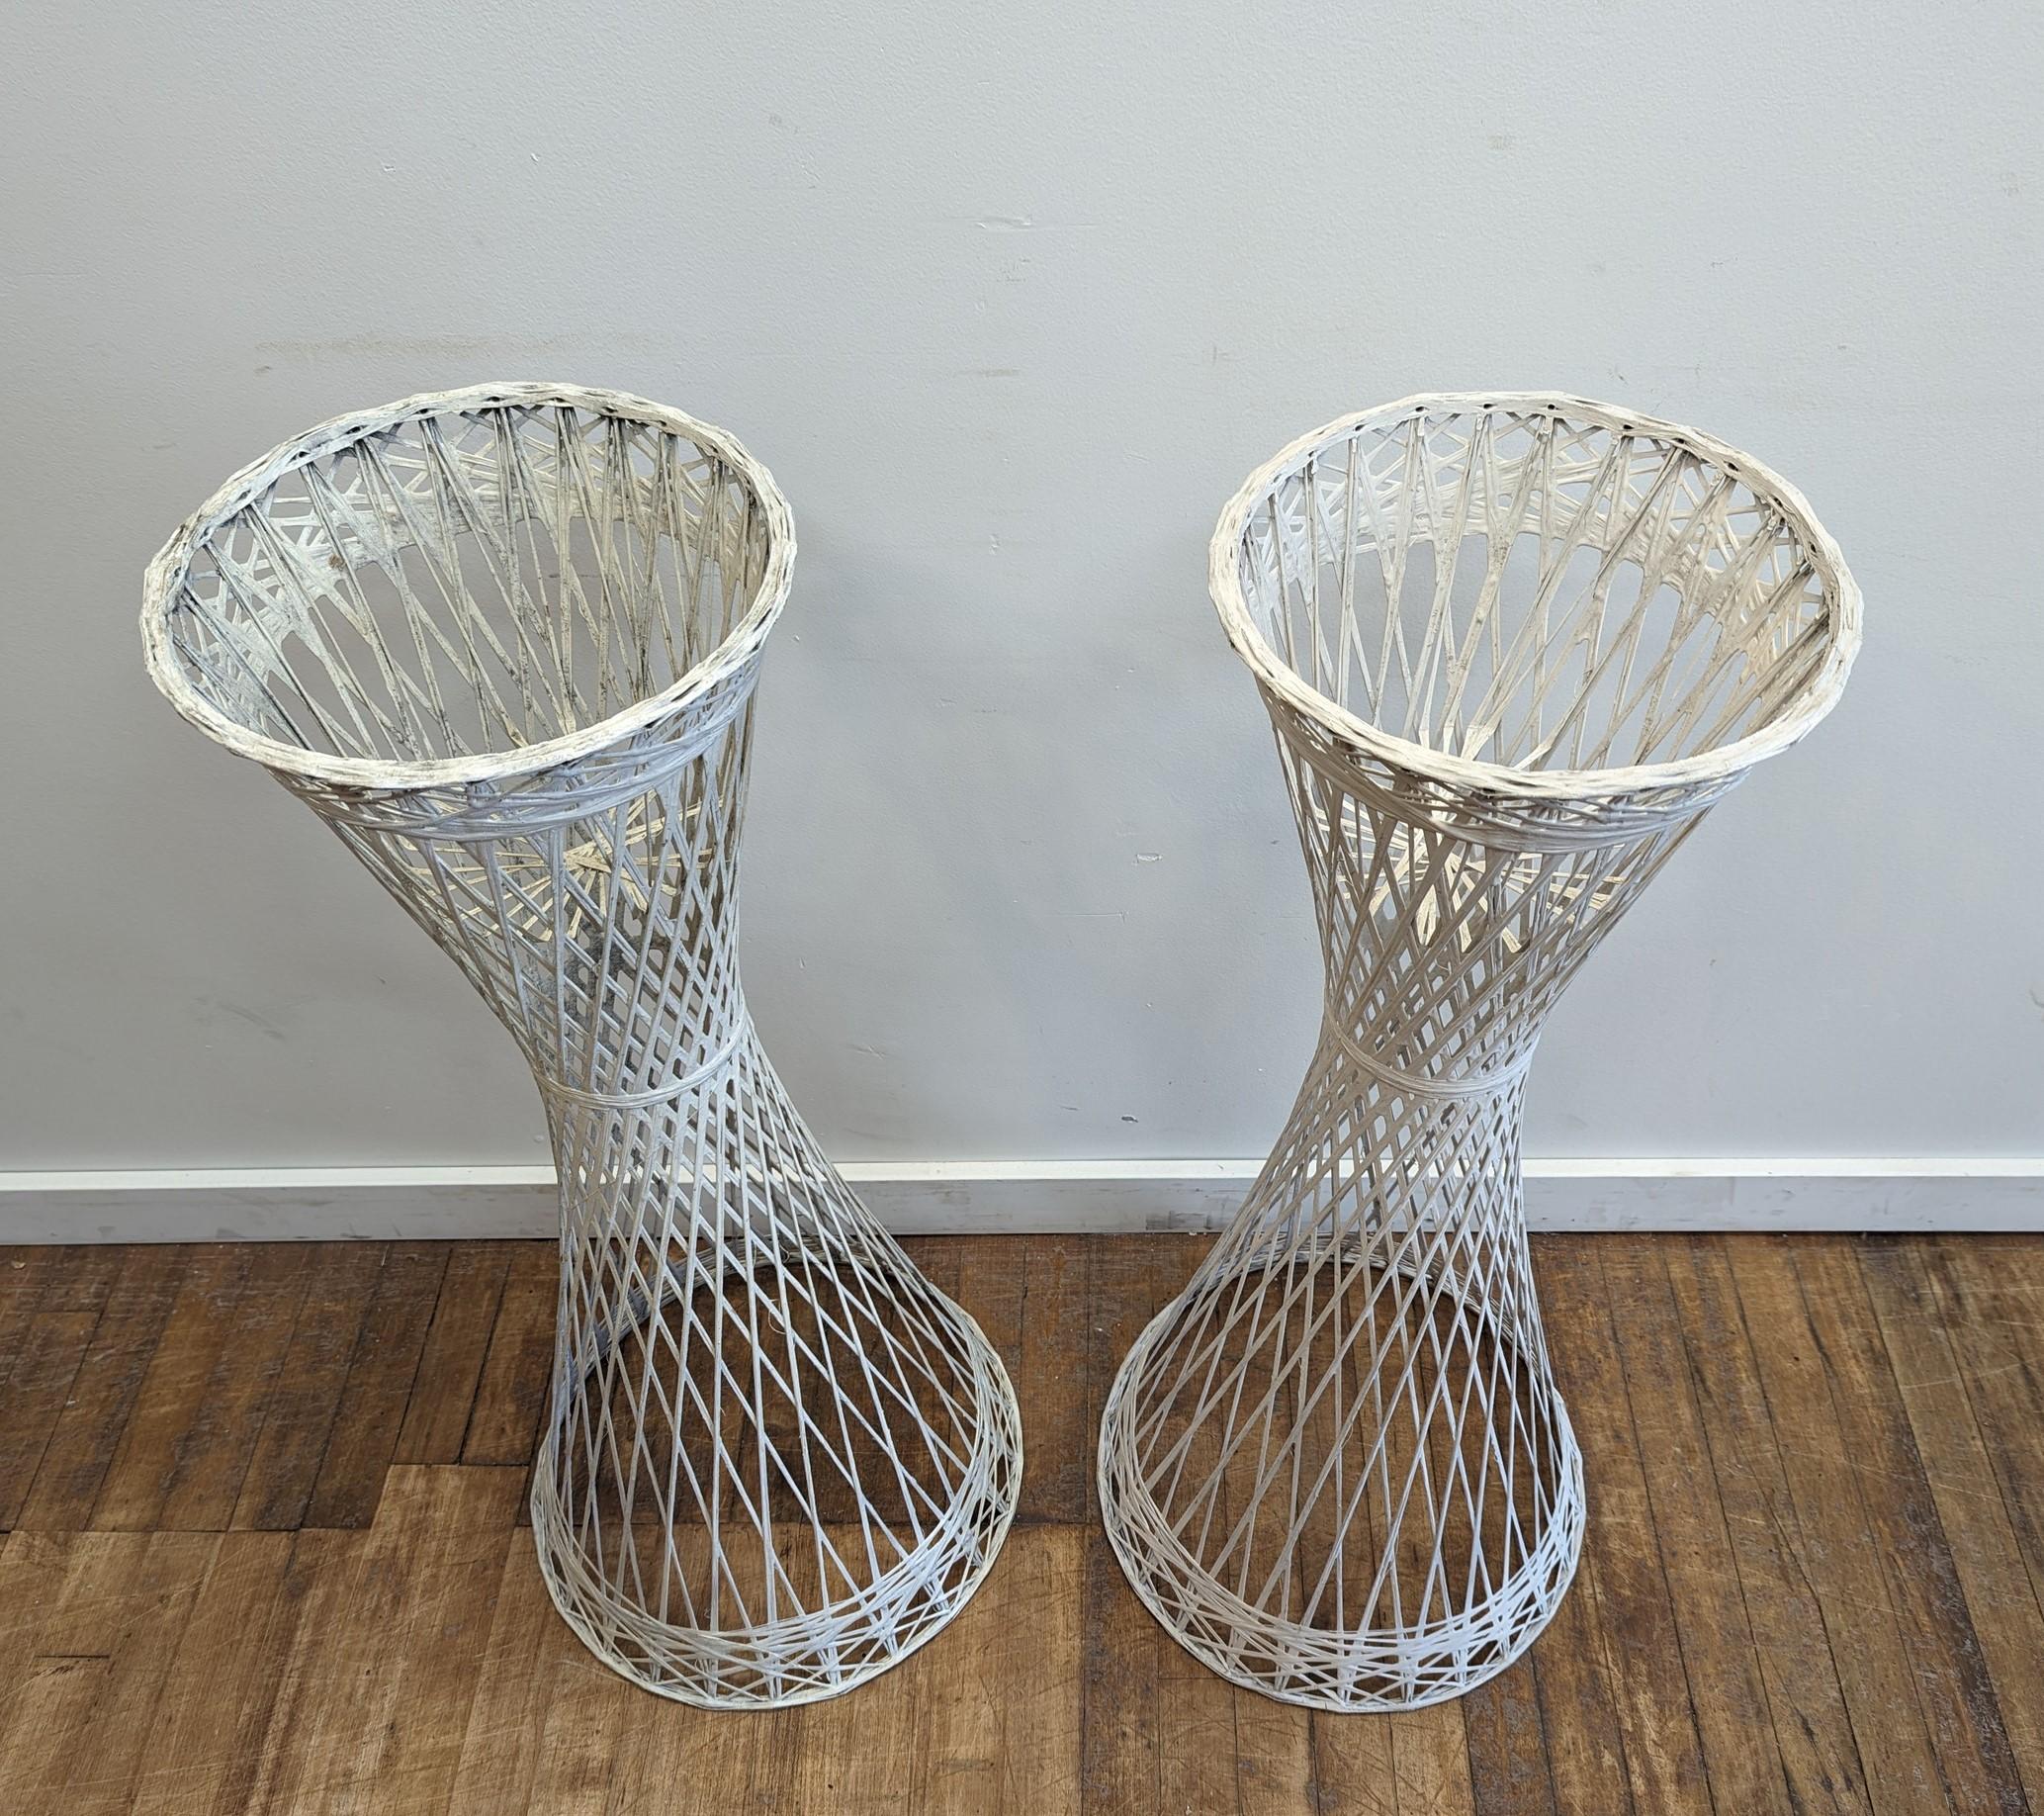 Pair of Russell Woodard Spun Fiberglass Plant Stands Mid Century Modern.  
Nice pair of plant stands.  Light weight can be used inside, outside, patio.  in original white paint.  Very good condition.  Can easily be painted back or any color for